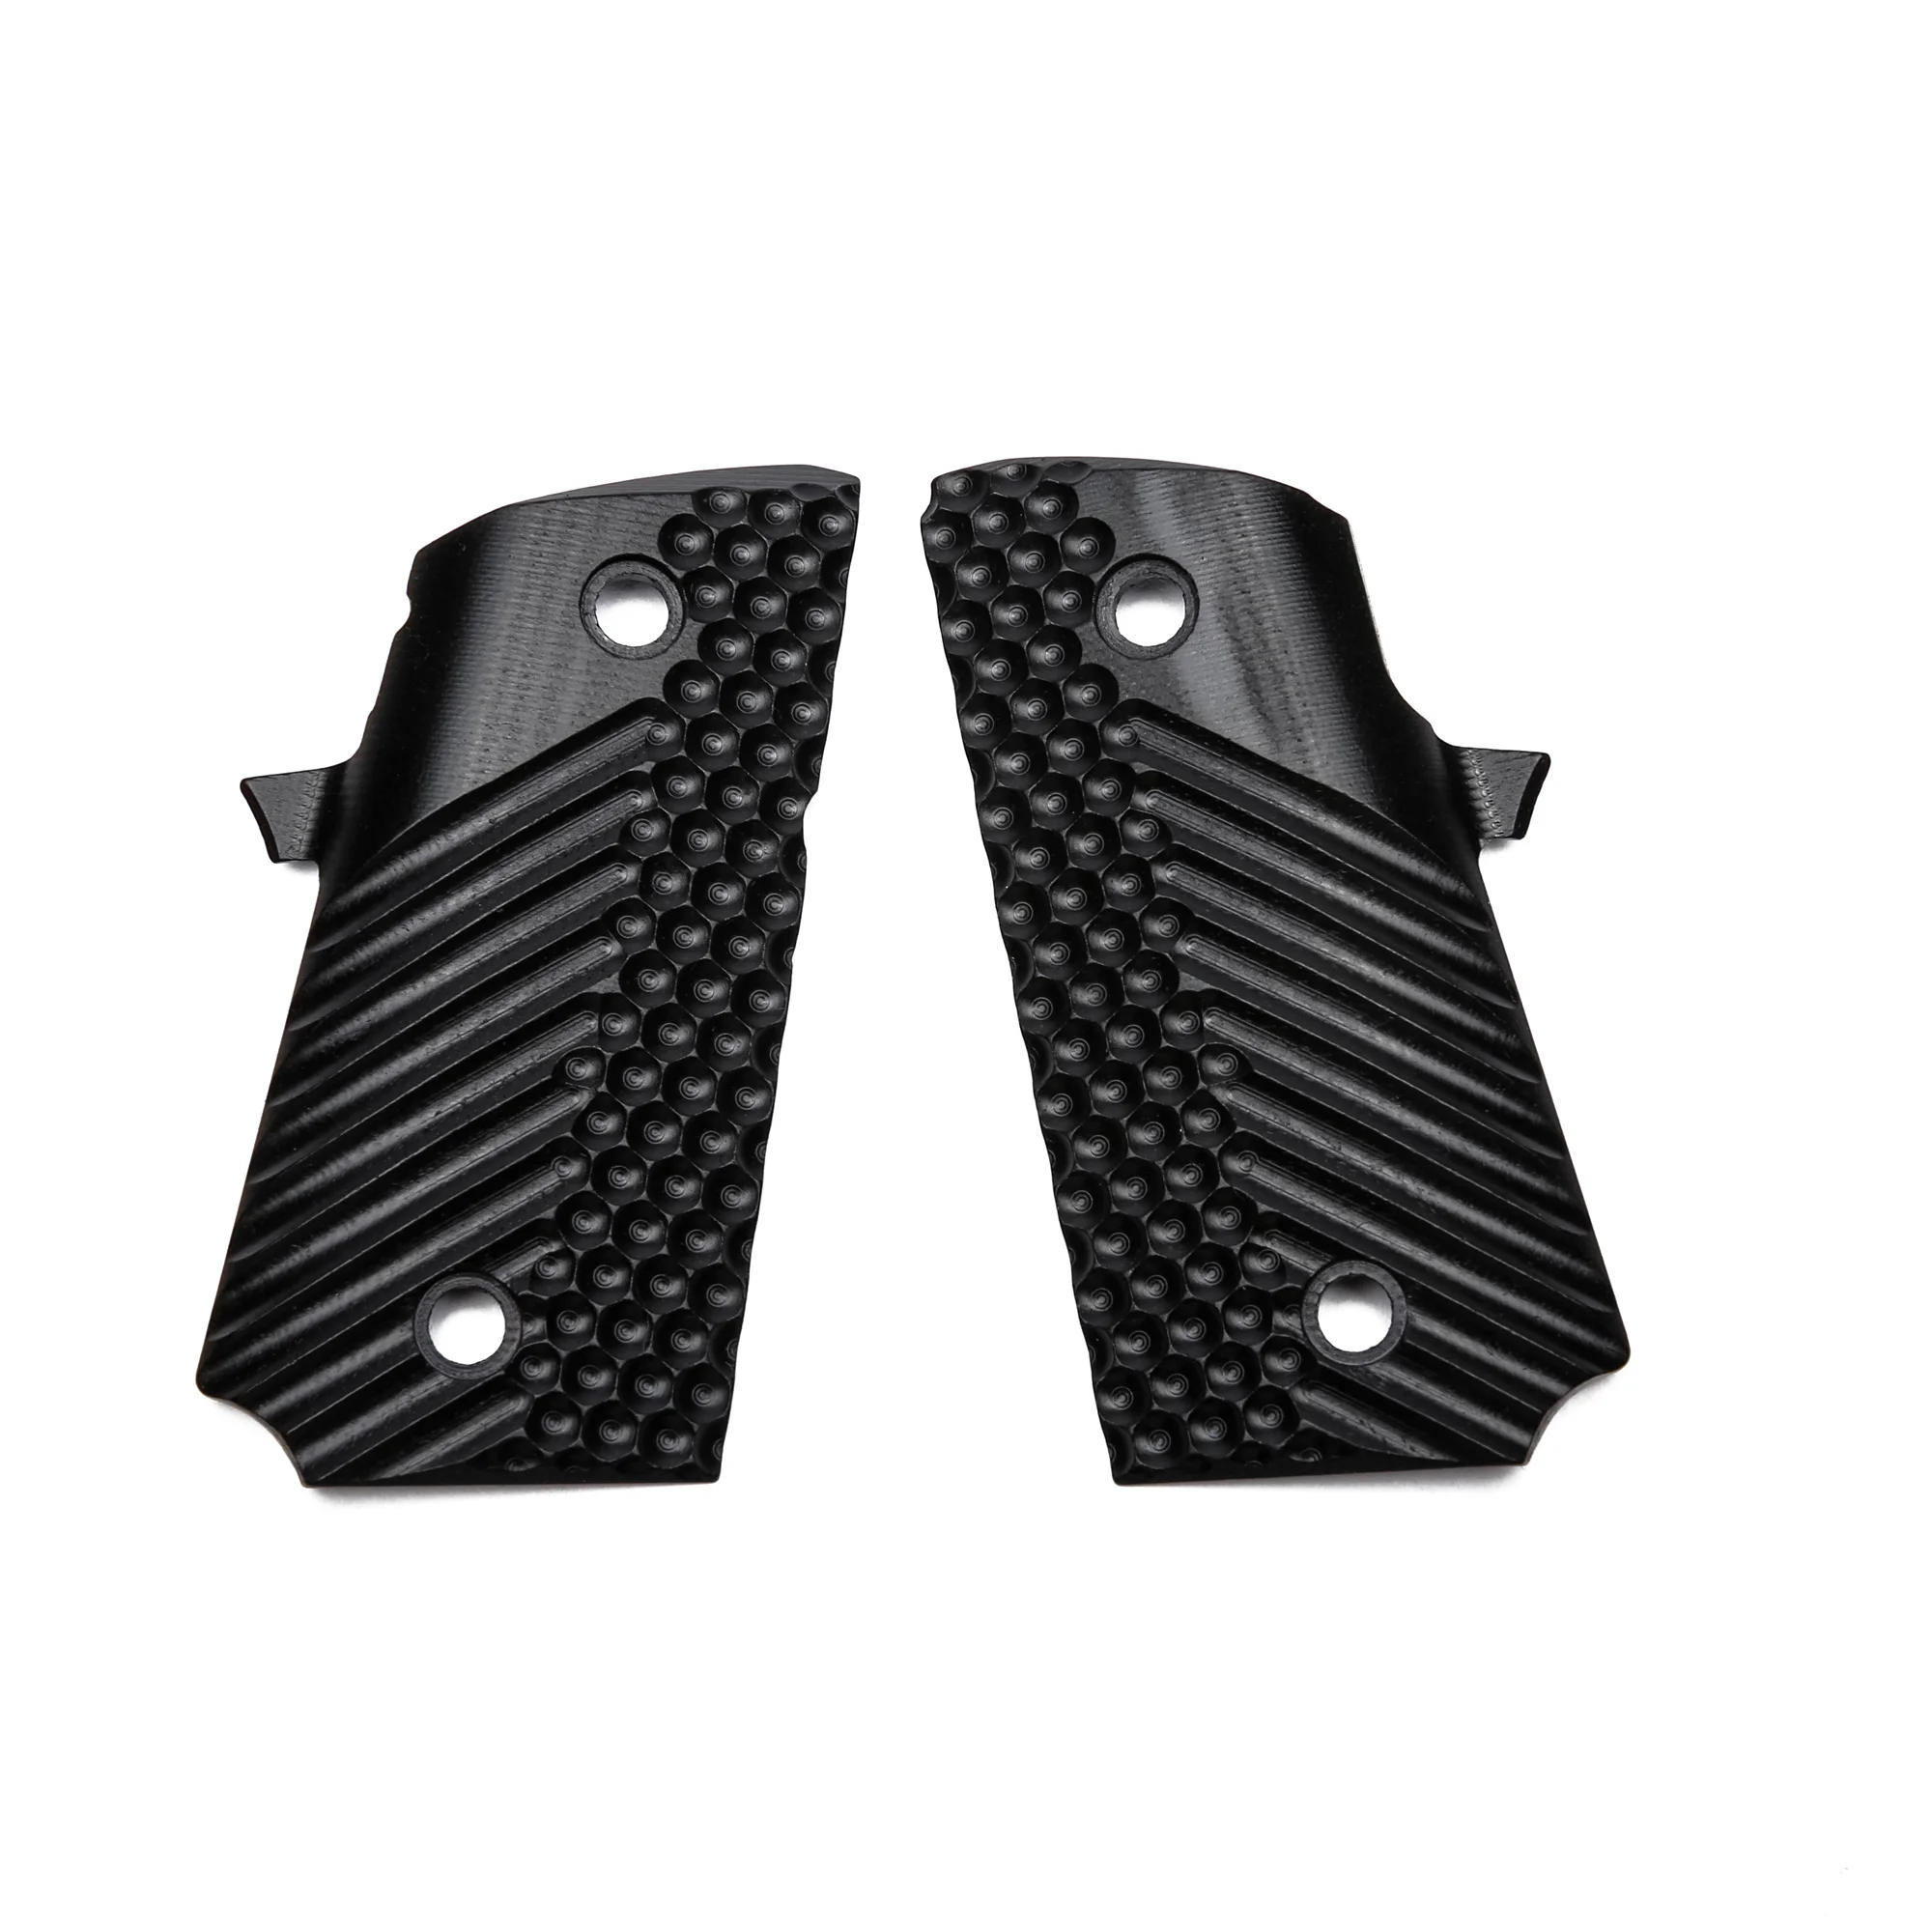 

Guuun G10 Grips for para Ordnance P10 1911 OPS Tactical Texture